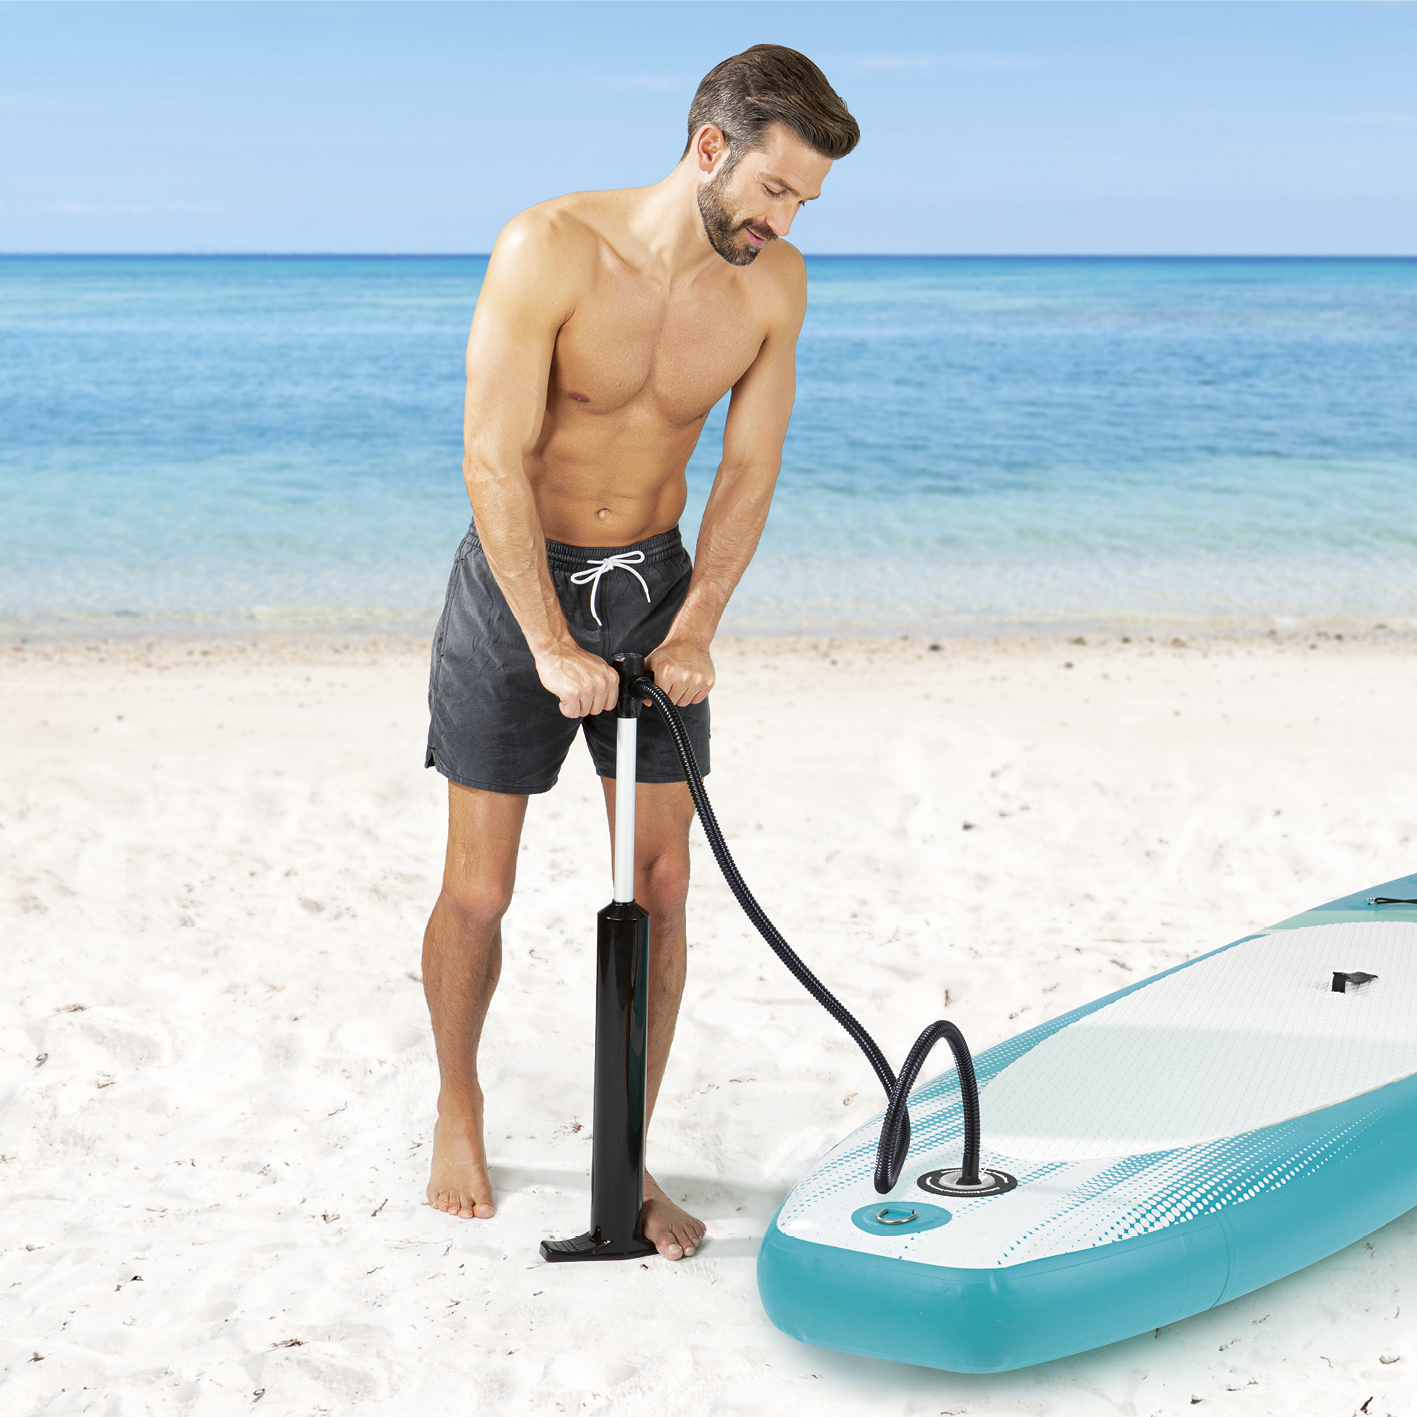 Paddle-Board, mehrfarbig MAXXMEE Stand-Up 06007